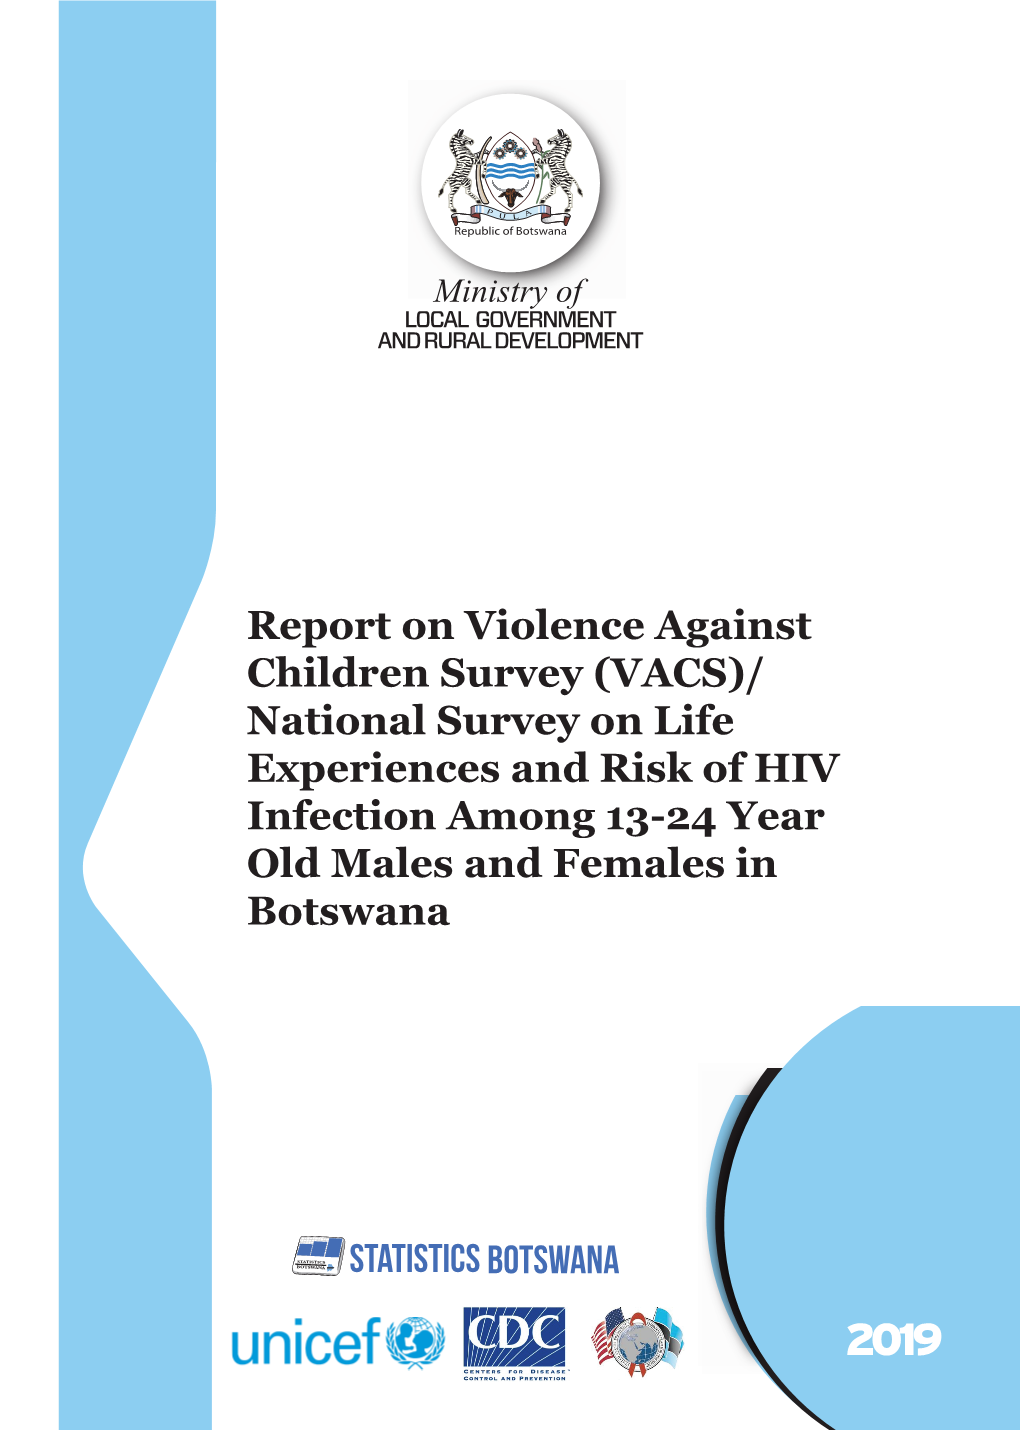 Report on Violence Against Children Survey (VACS)/ National Survey on Life Experiences and Risk of HIV Infection Among 13-24 Year Old Males and Females in Botswana